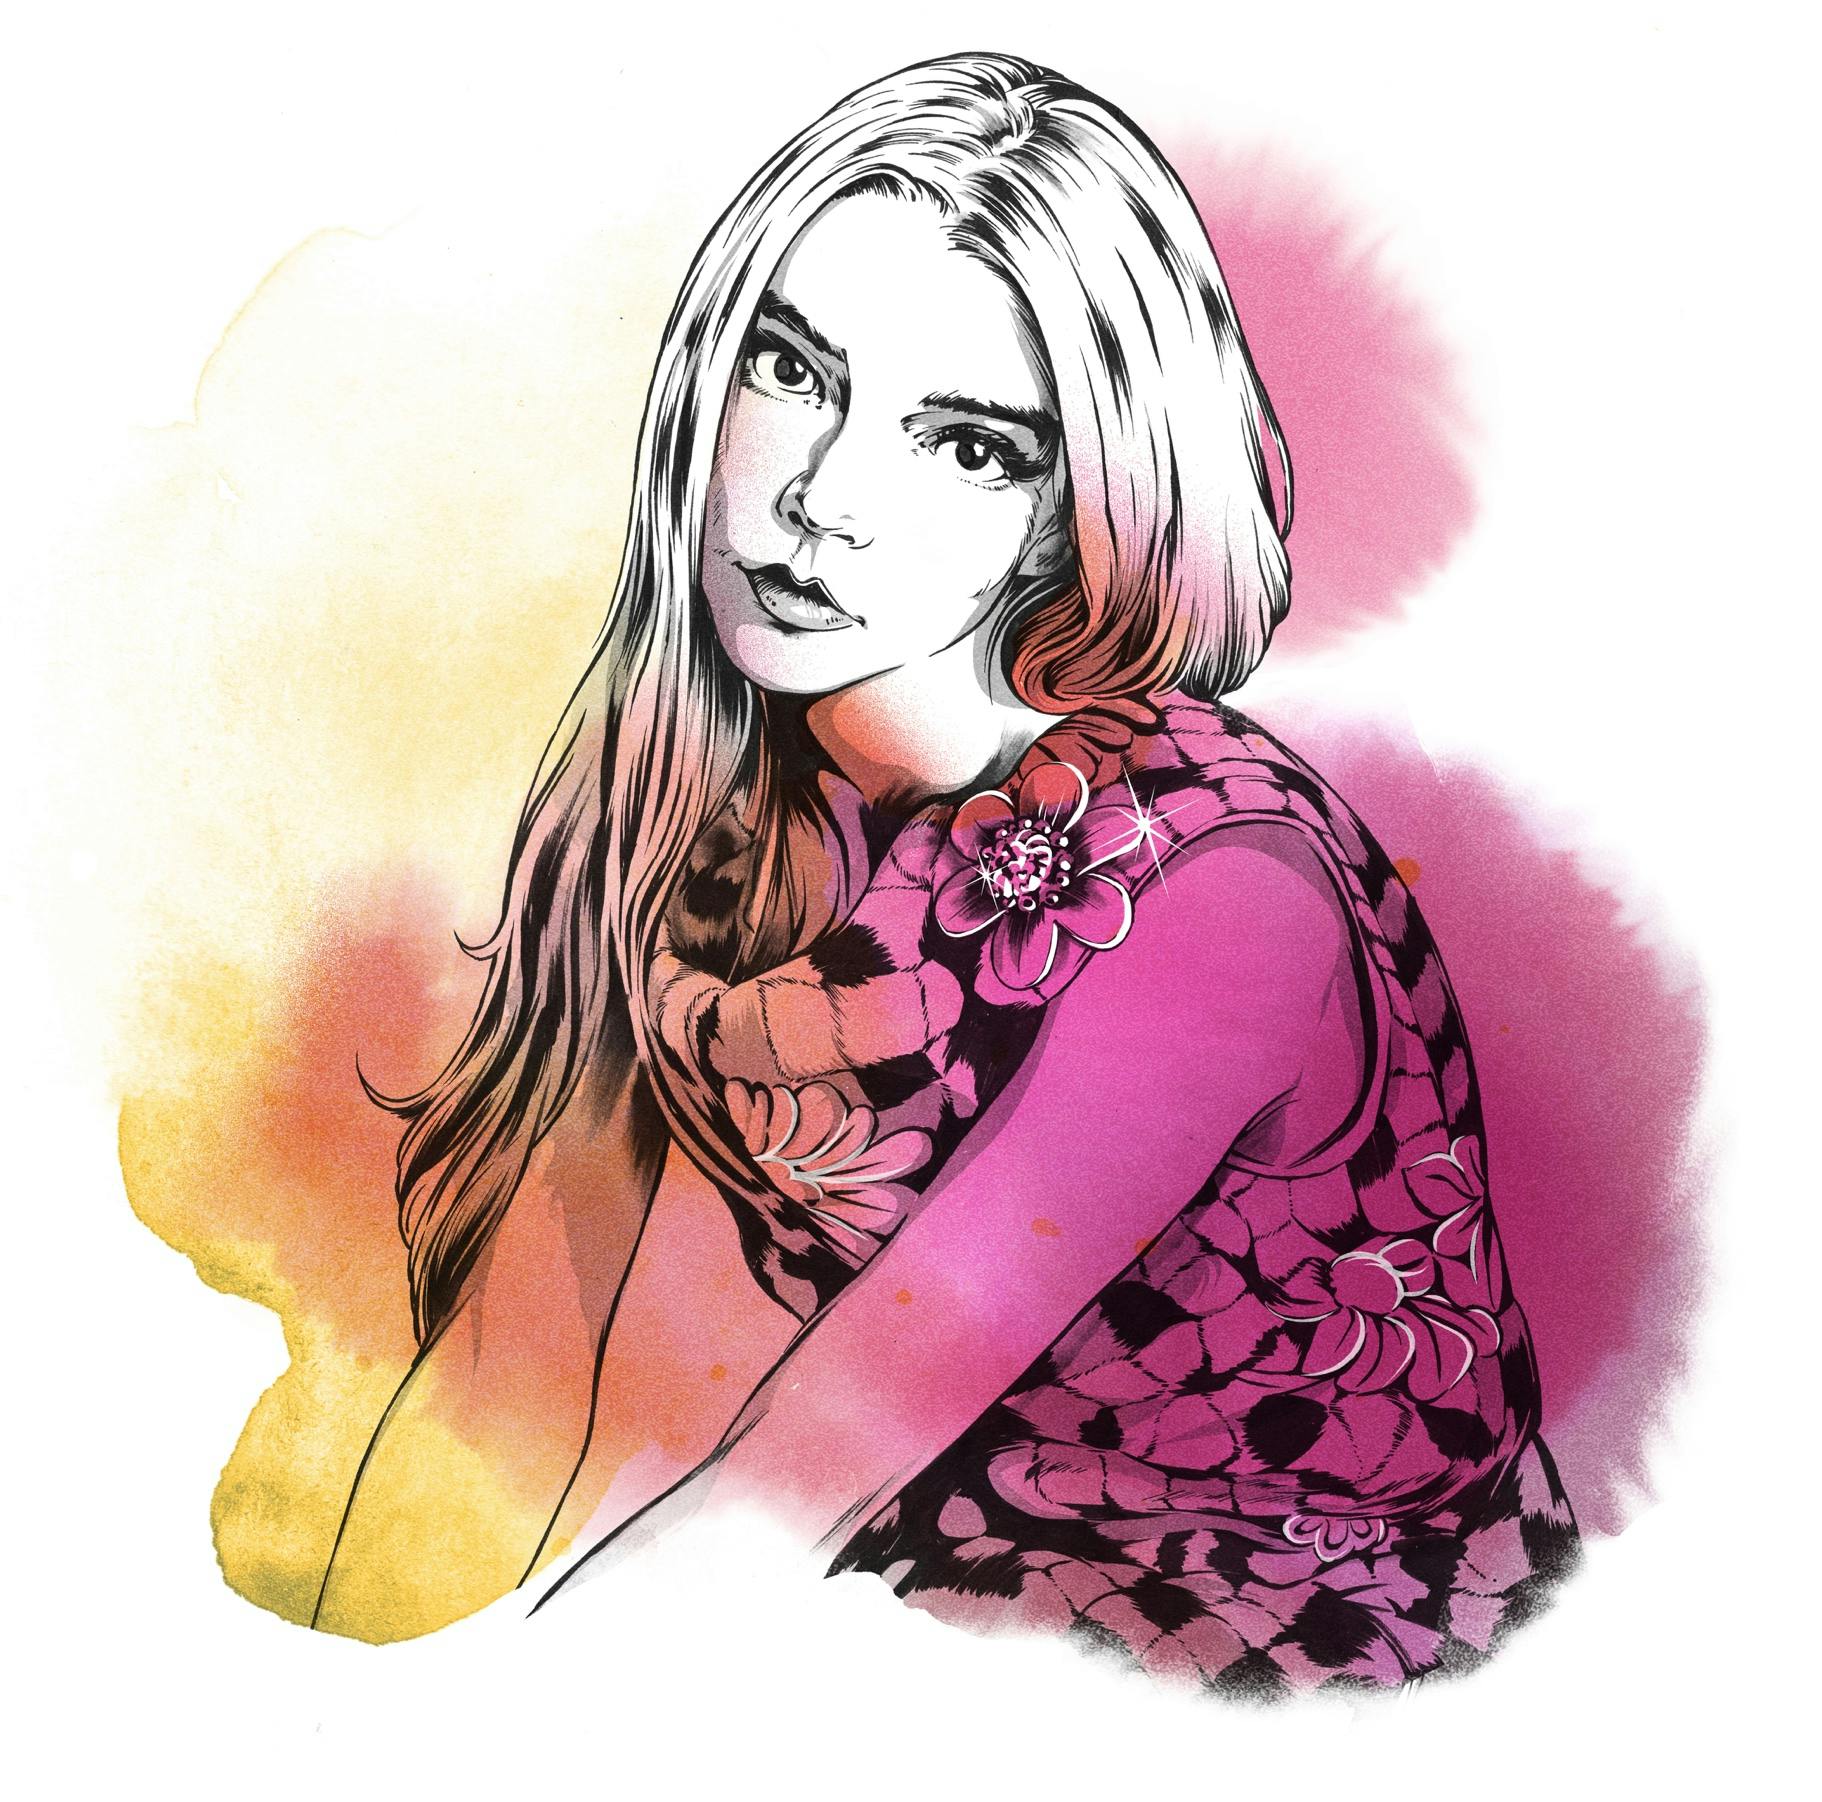 A pencil and watercolor sketch of Anya Taylor-Joy in pinks and yellows. Her head is cocked to one side, and she’s wearing a sleeveless dress in a bold floral and check print.  